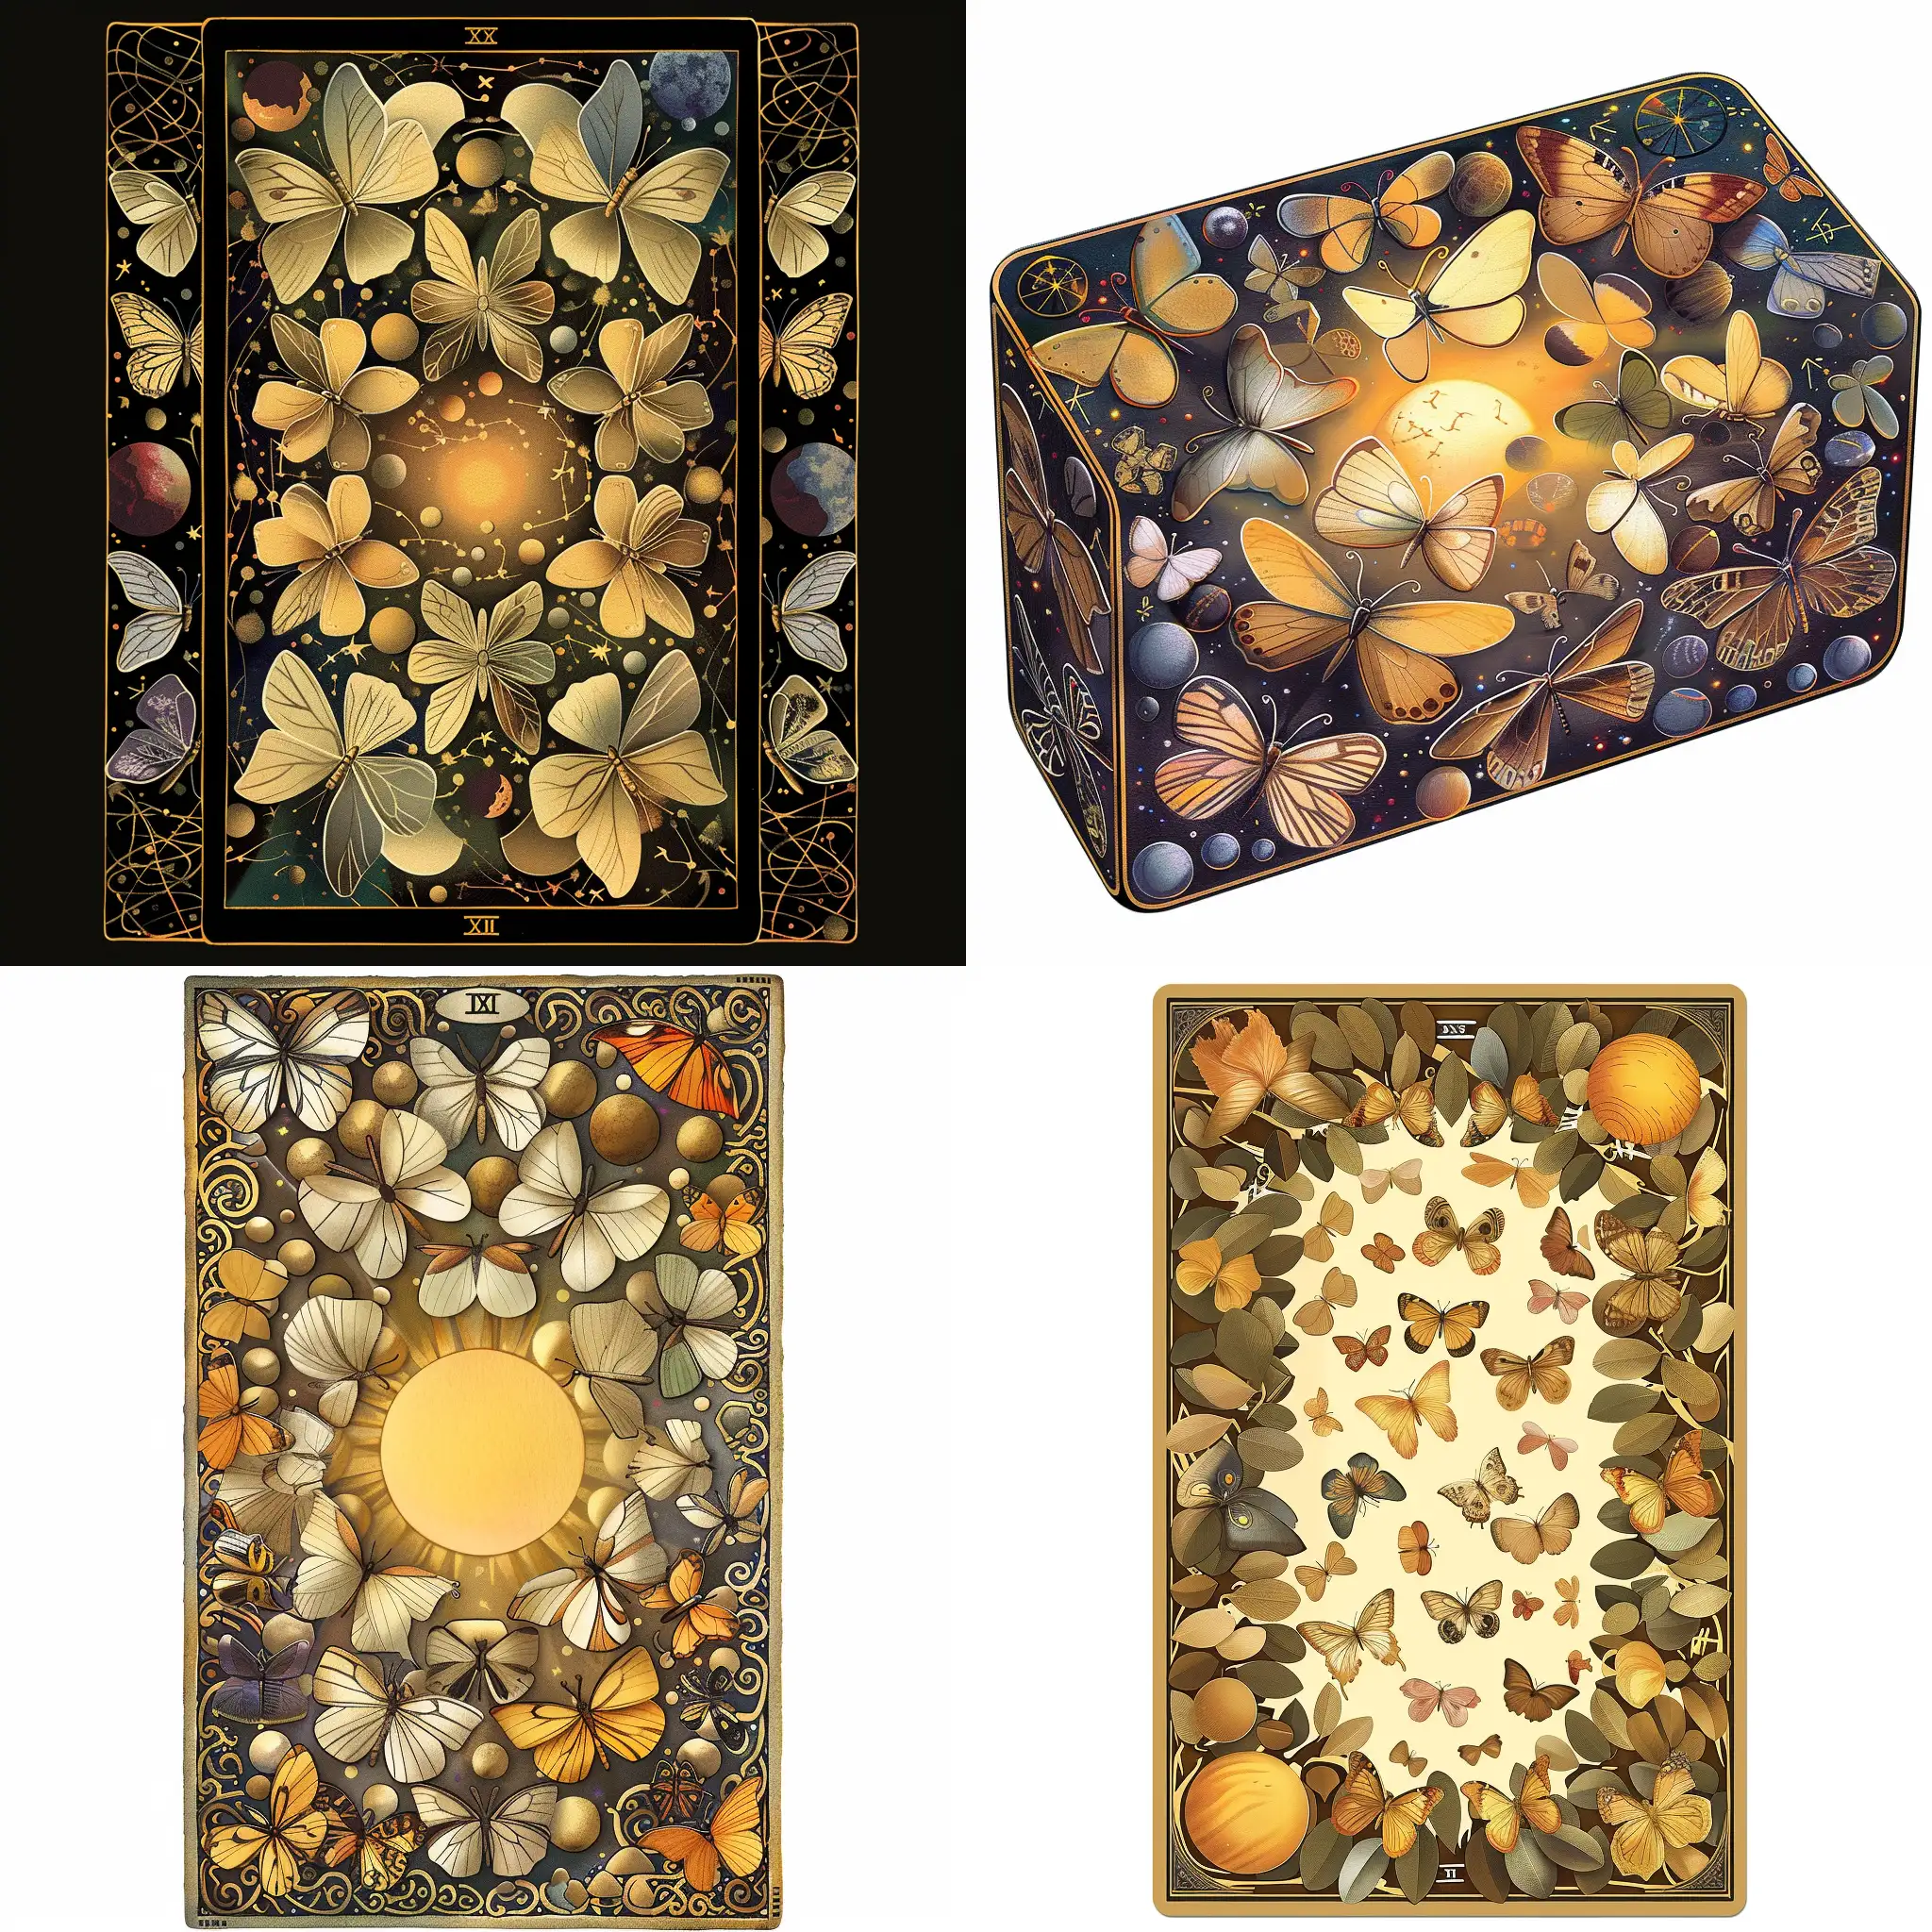 Rectangular-Box-with-Butterfly-Planet-and-Zodiac-Sign-Motifs-Inspired-by-Tarot-Cards